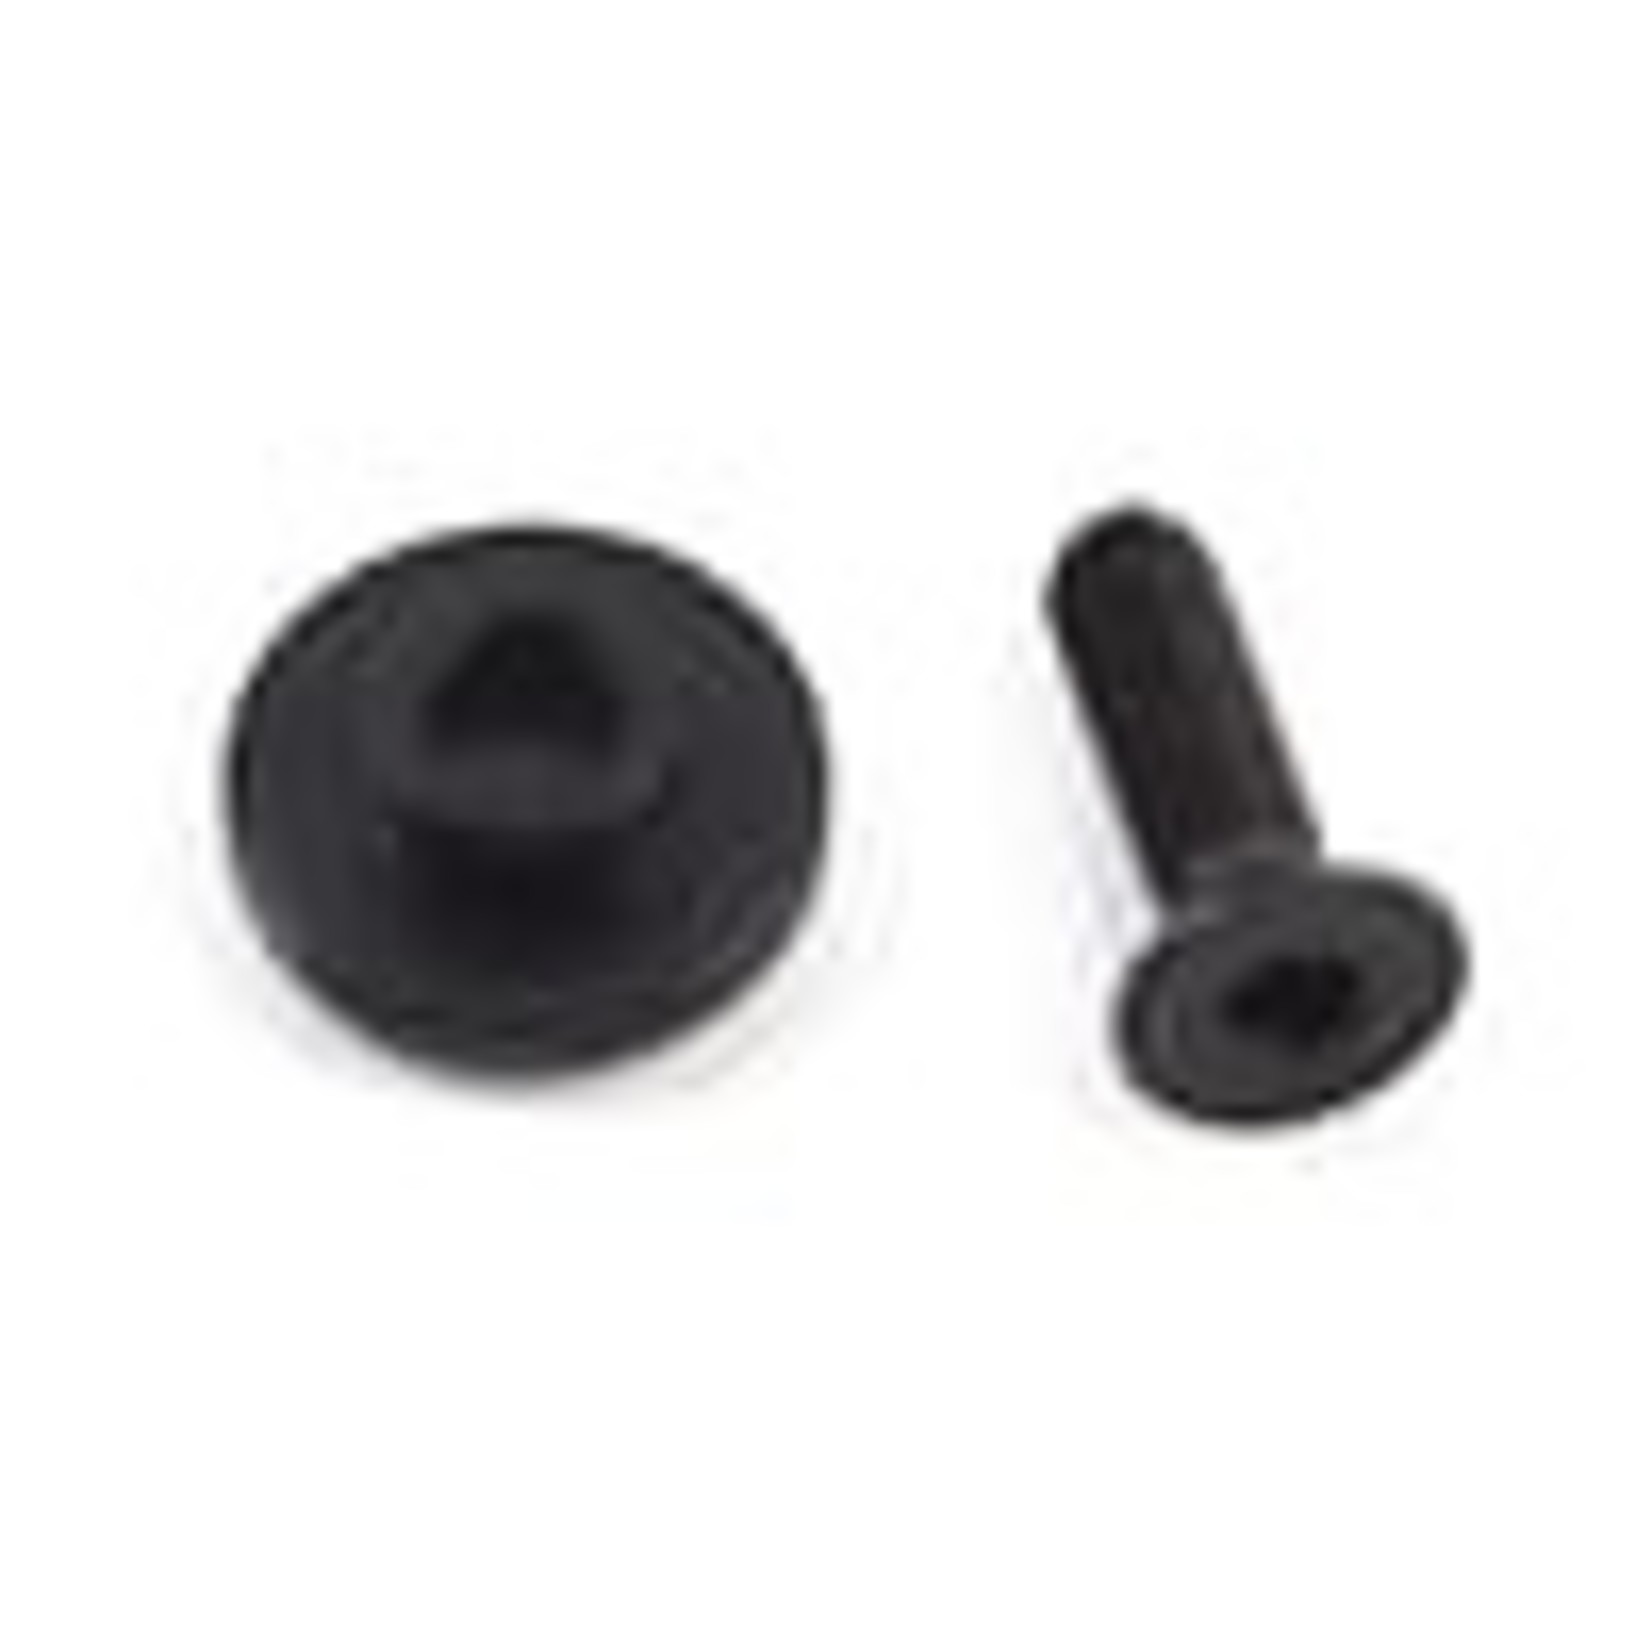 REDS REDS Losi/Tekno Off-Road Clutch Retainer Washer